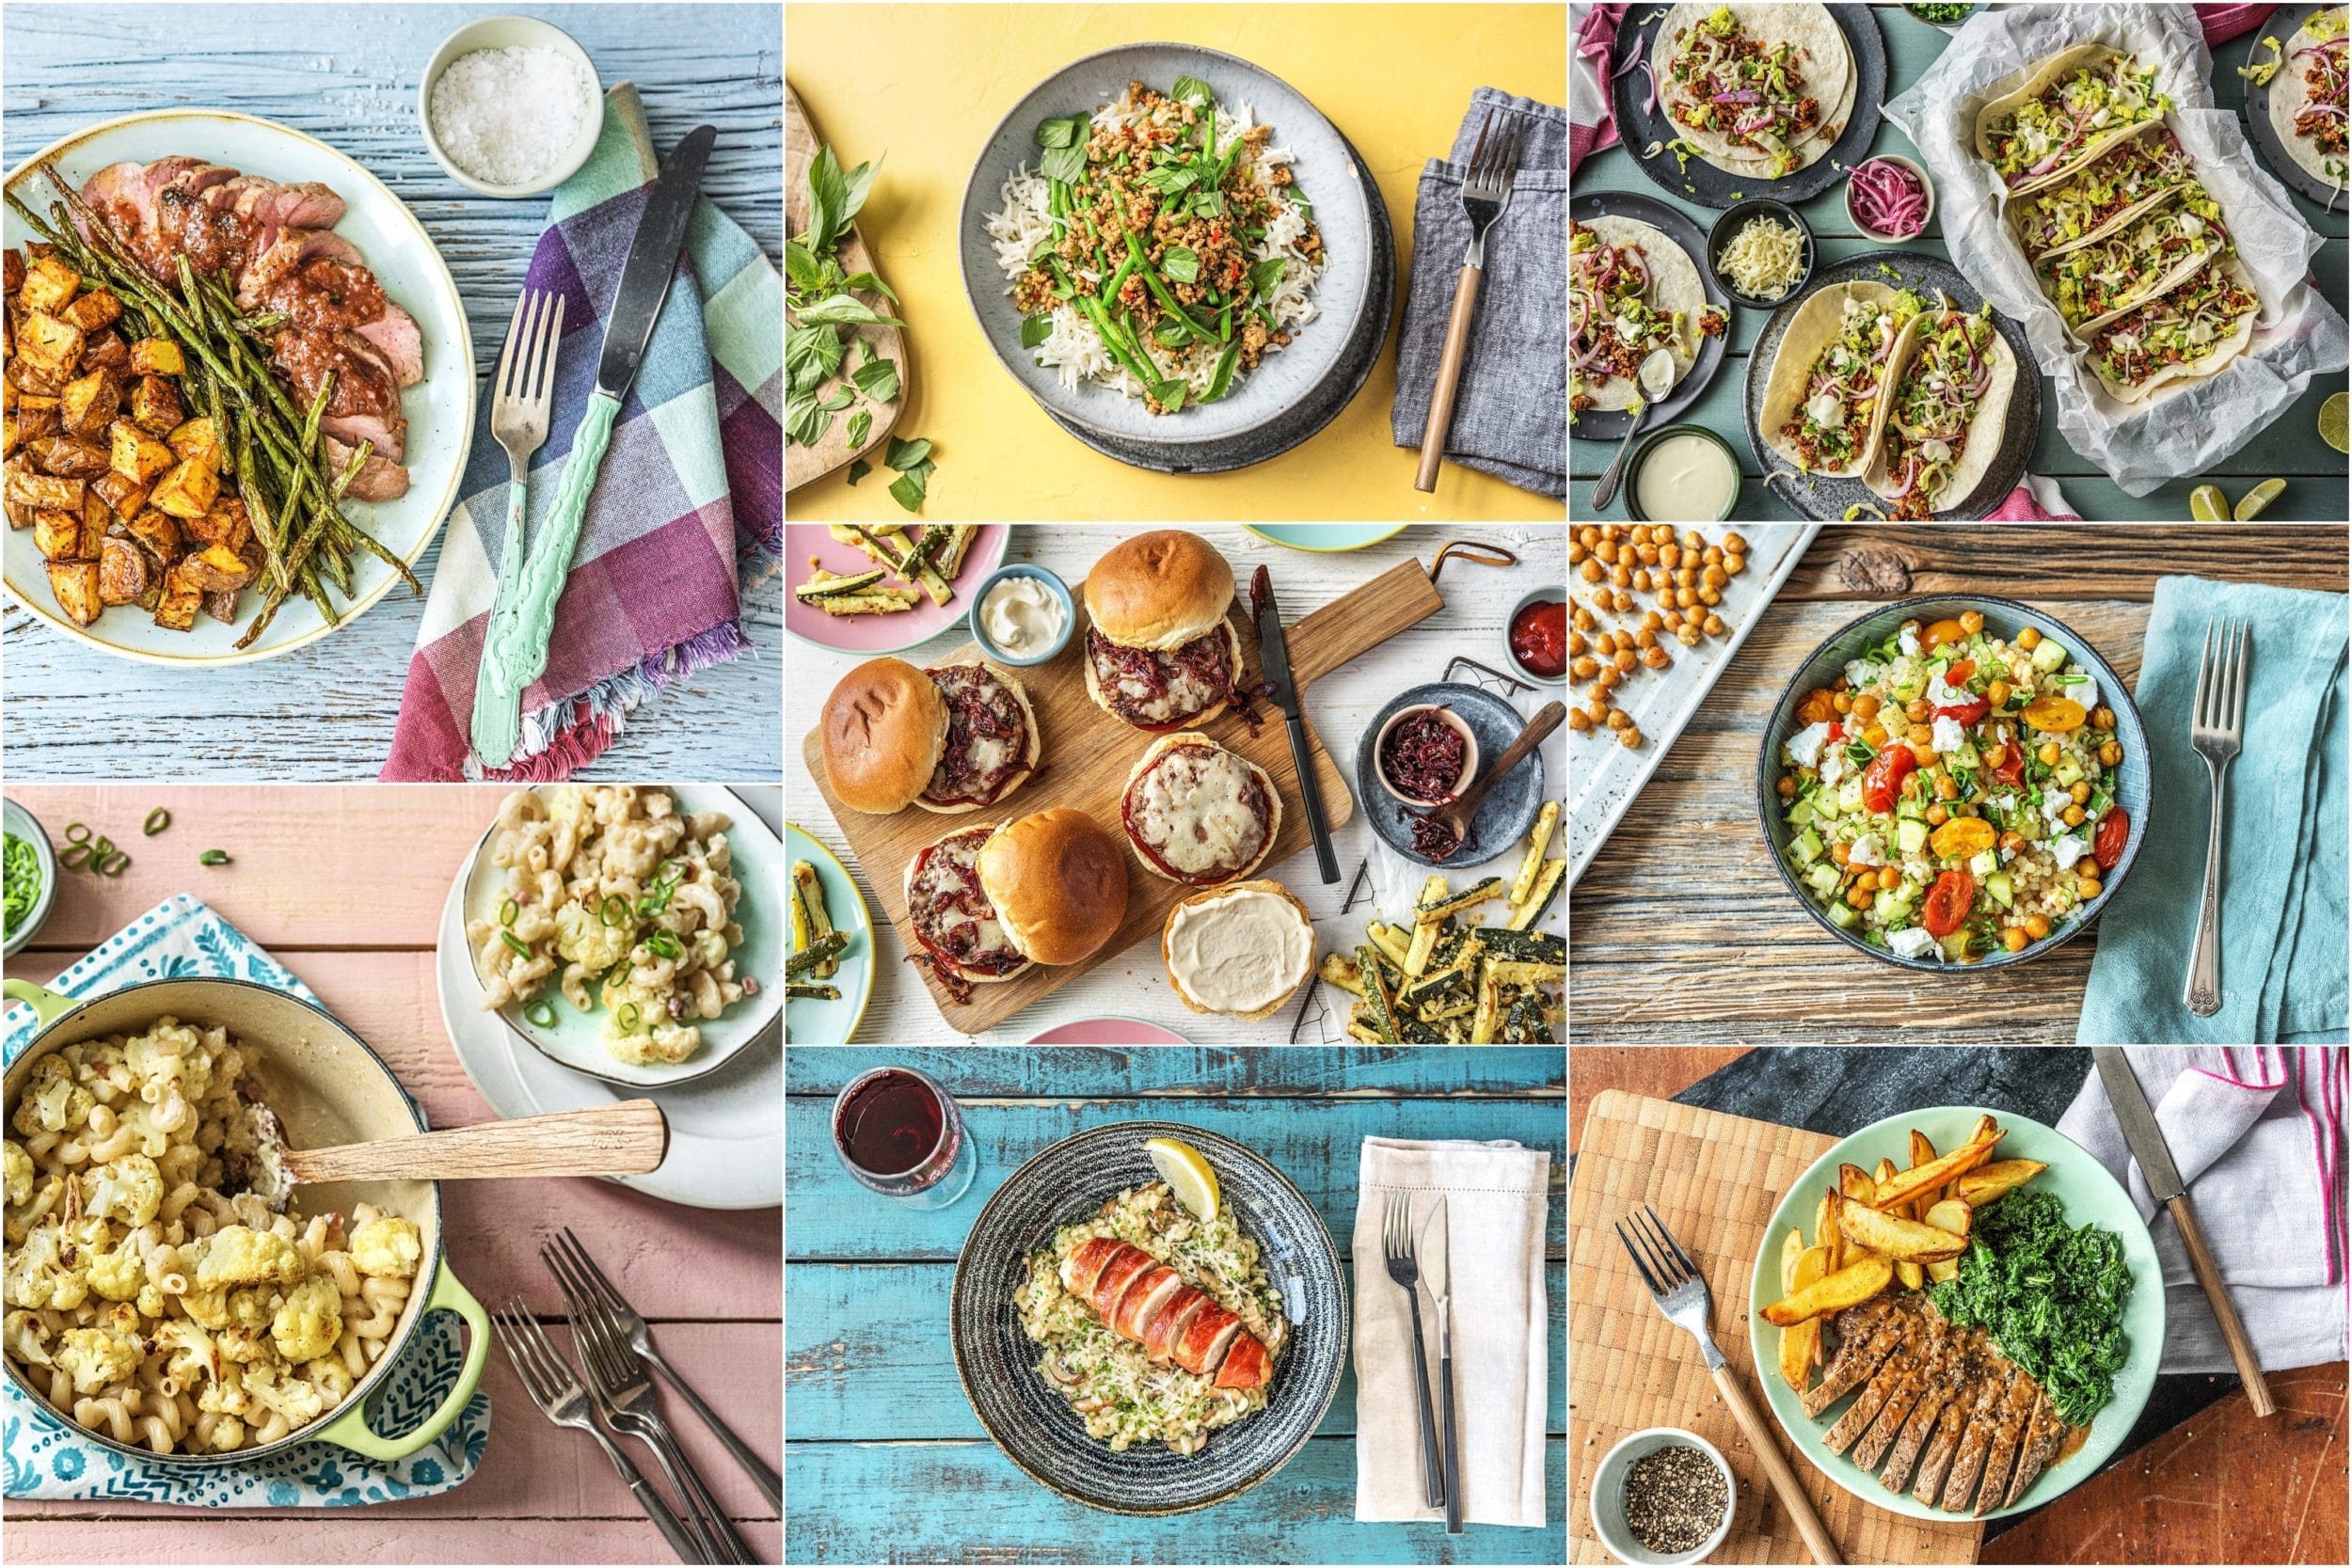 Cheap  Hellofresh Meal Kit Delivery Service Deals For Memorial Day